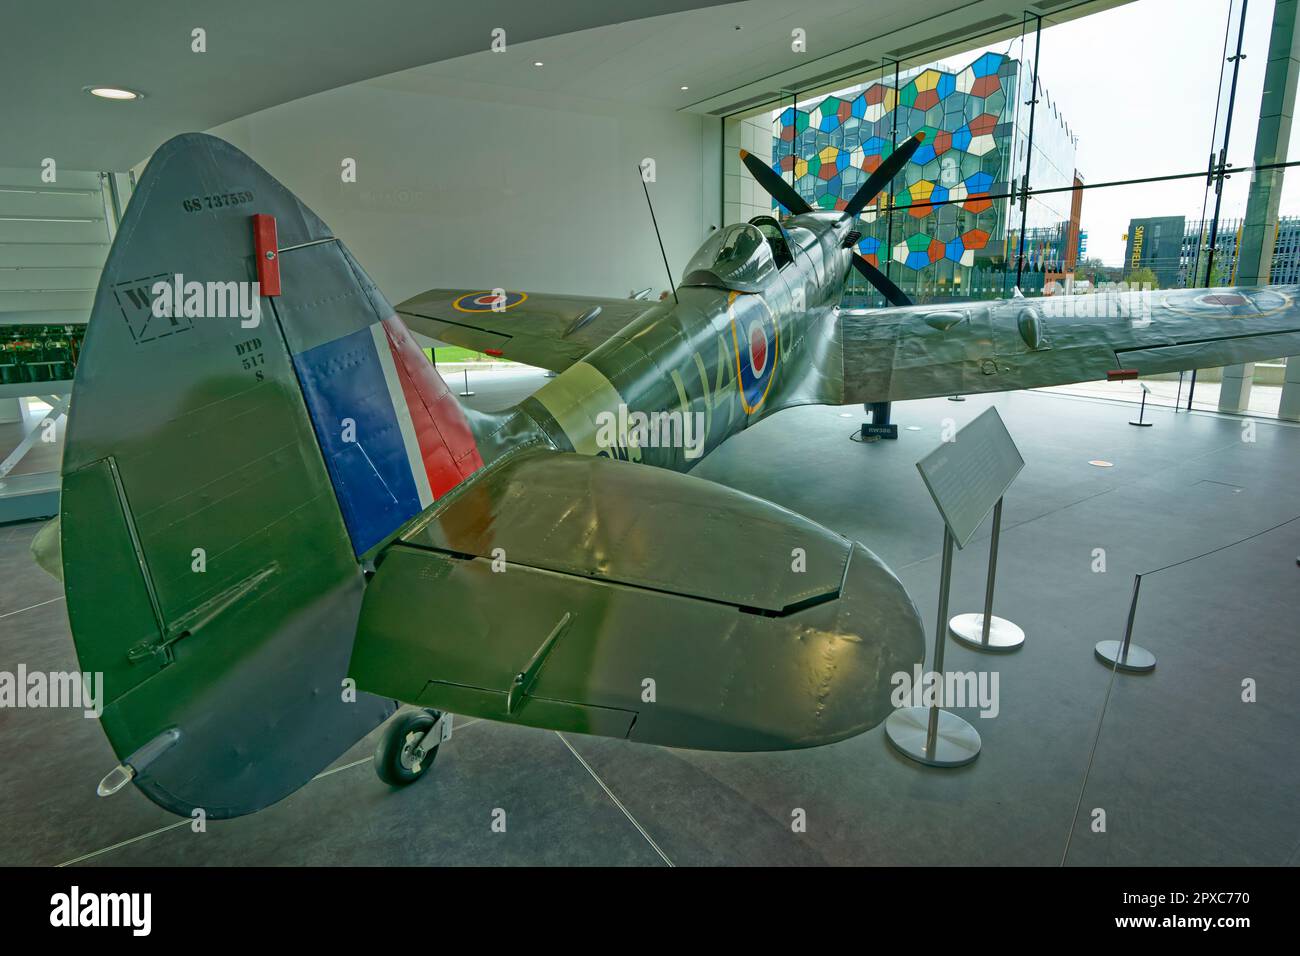 The Potteries Museum Spitfire Hall. RW388 was given to Stoke-on-Trent. It honours Reginald Mitchell, the Staffordshire designer of the Spitfire. Stock Photo